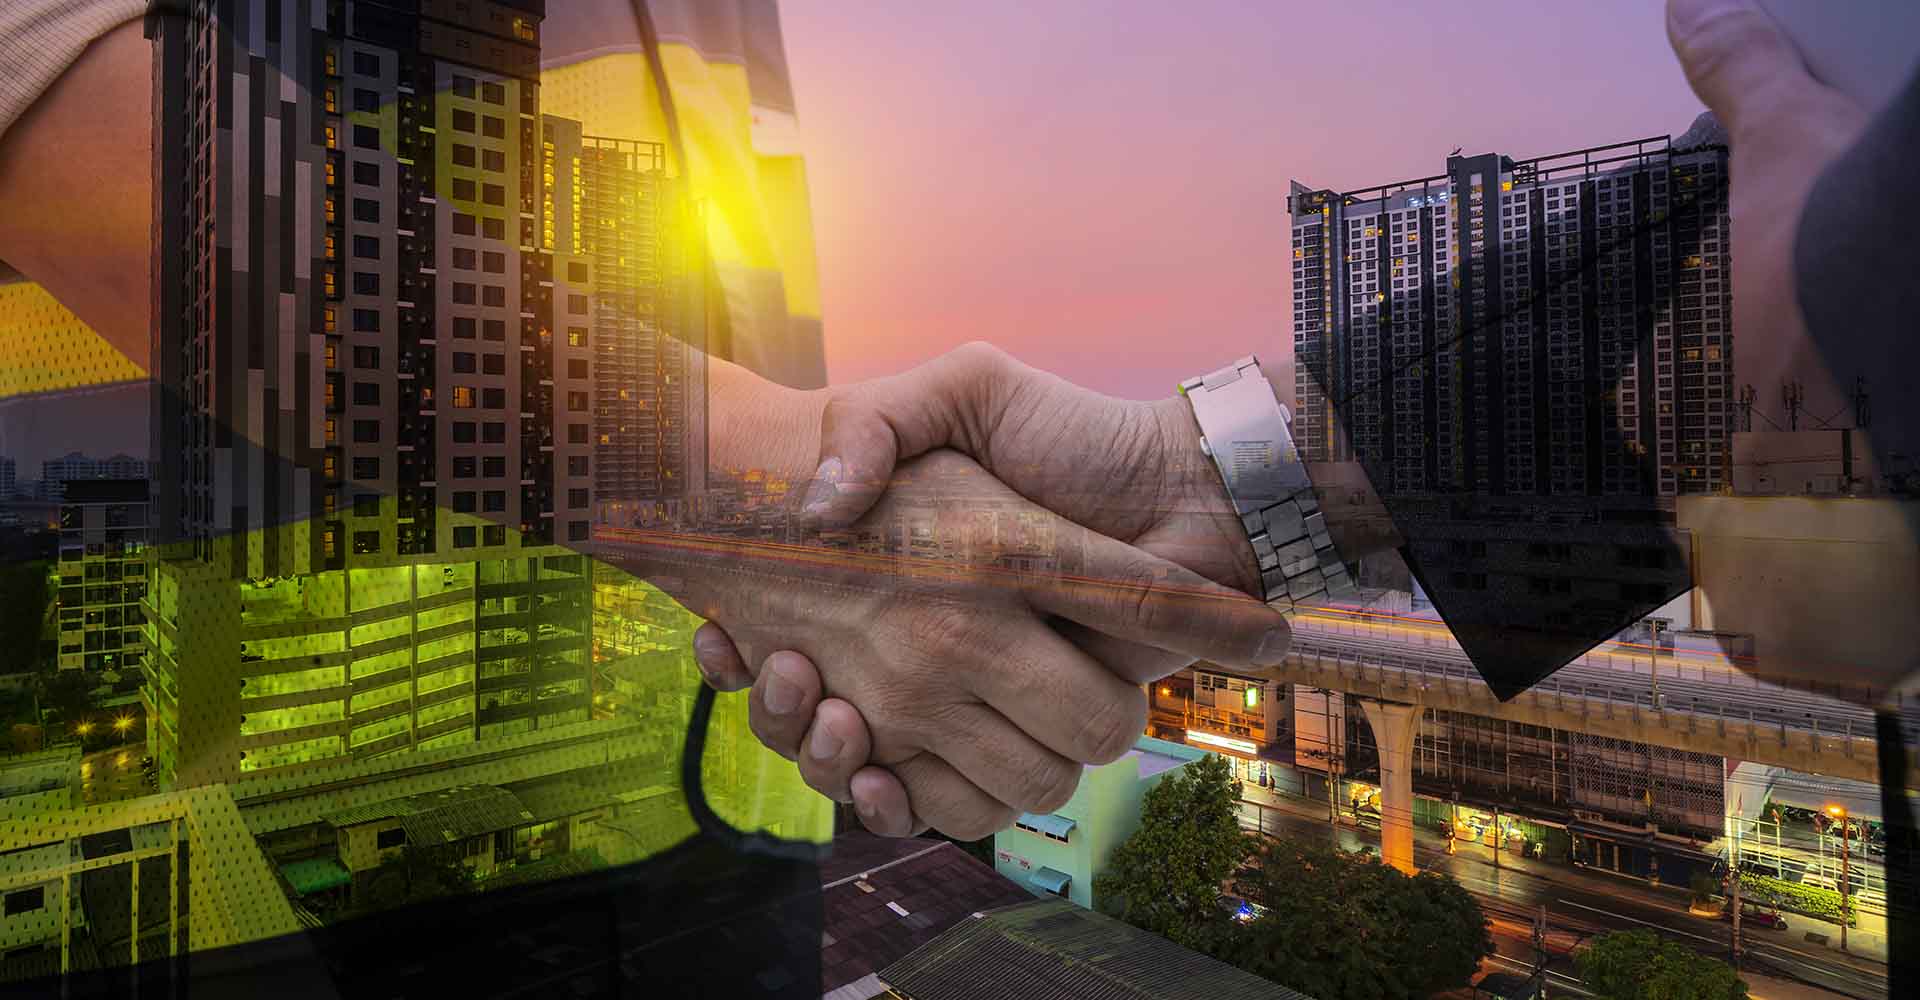 Architects and contractors shake hands to work. Sunset scence of modern office buildings and condominium. Future building construction with double exposure of engineer